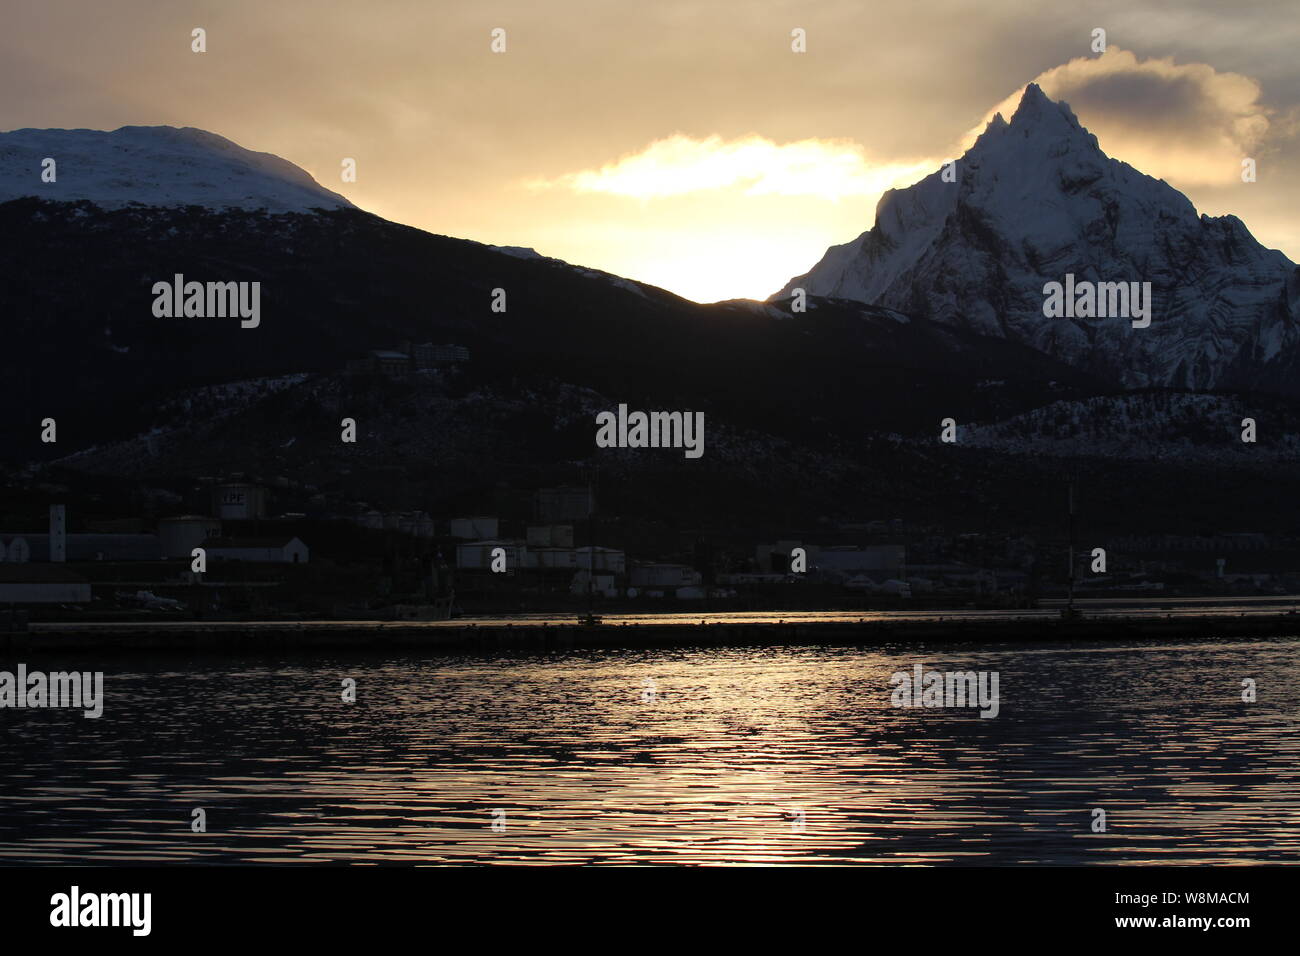 Sunrise in the city of Ushuaia, Tierra del Fuego, Argentina. July 2019 Stock Photo